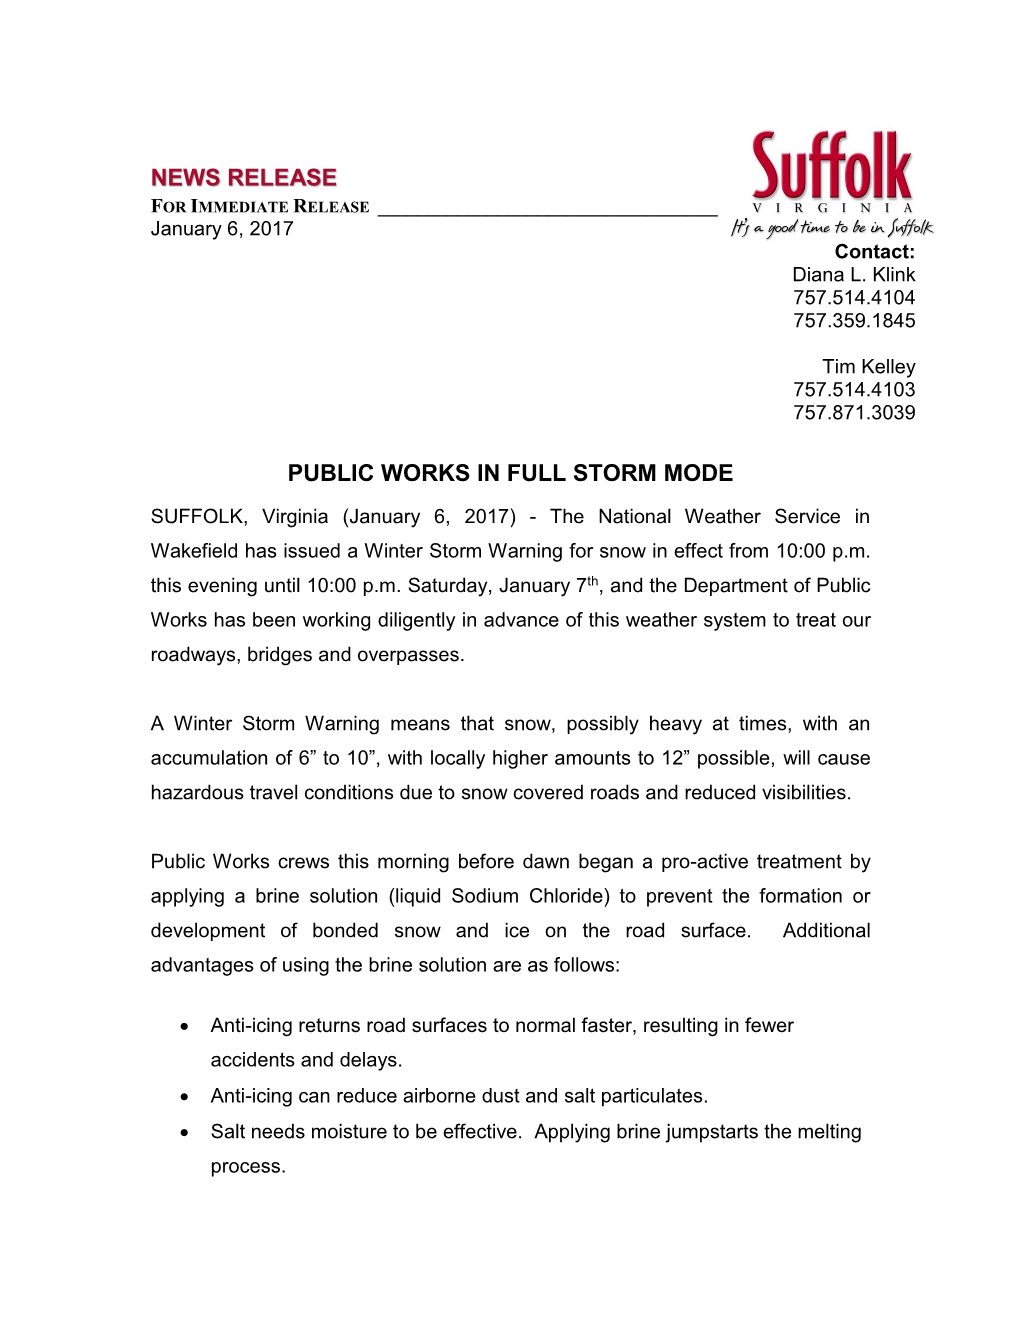 News Release Public Works in Full Storm